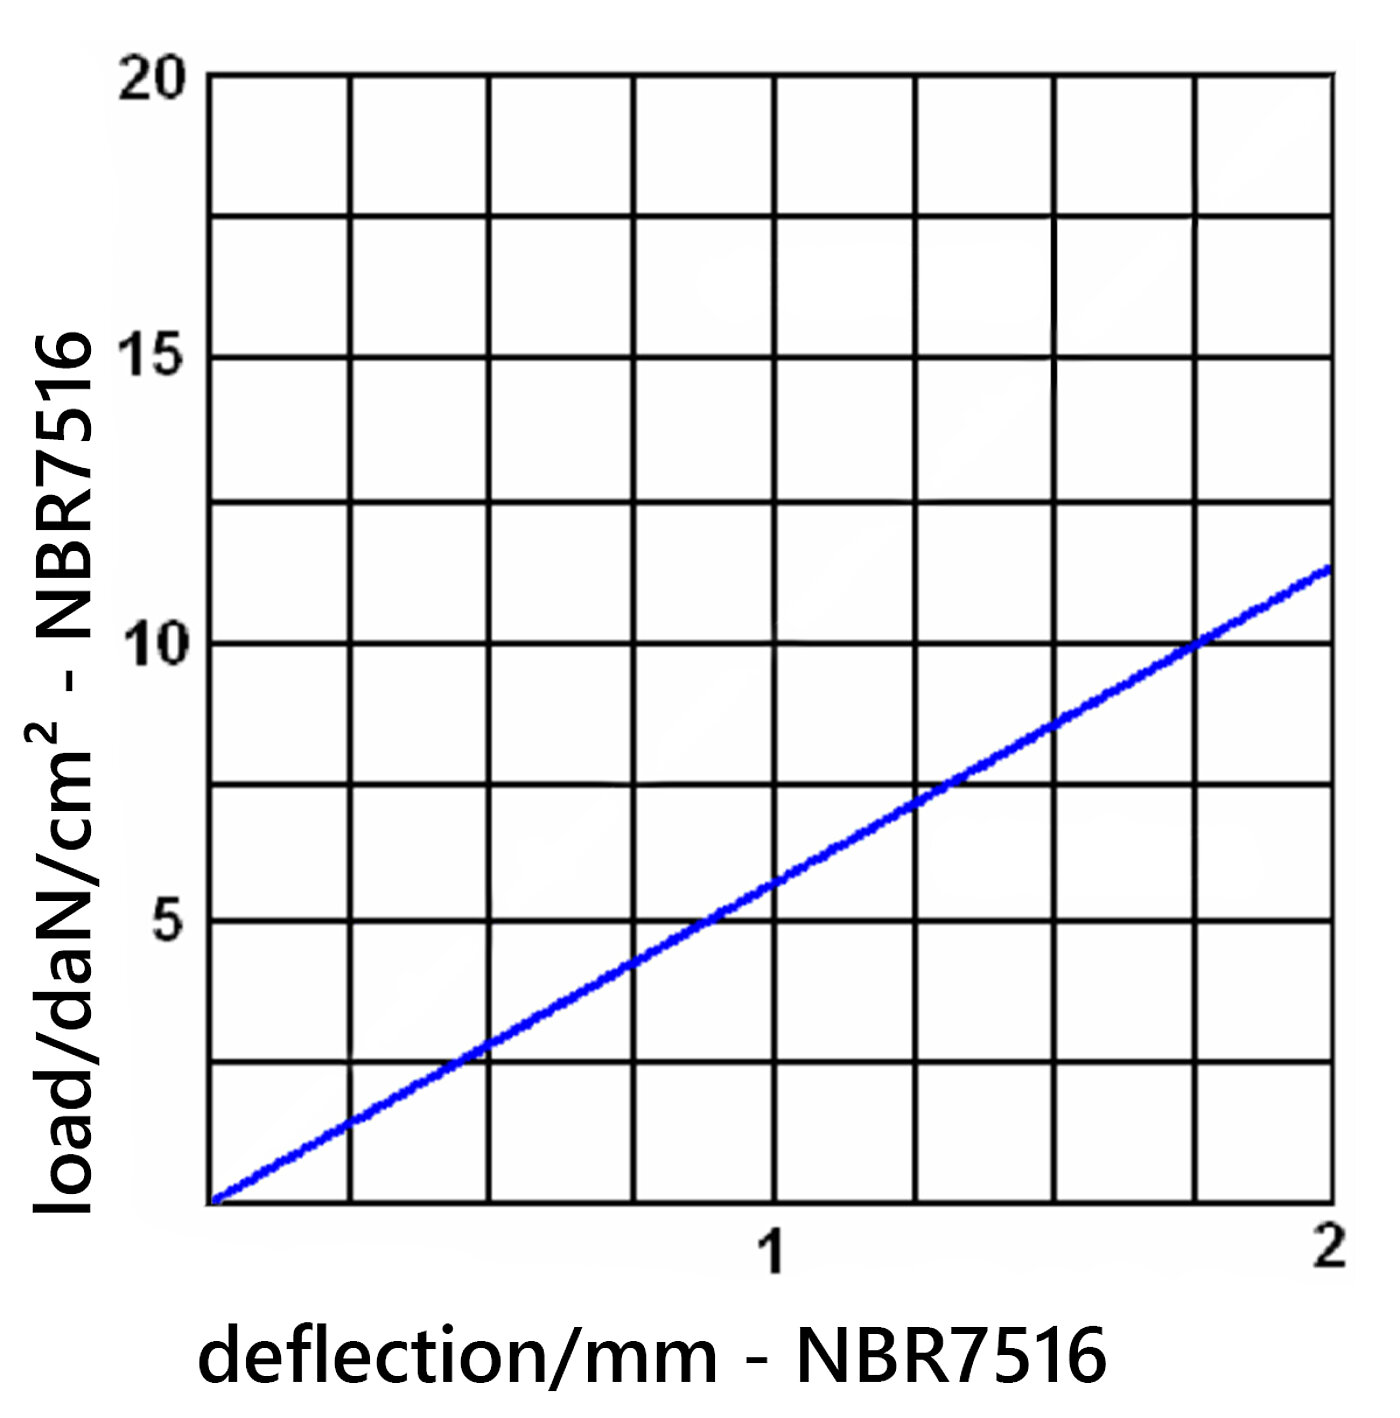 diagramme of the deflection of the elastomer board NBR7516 under load 